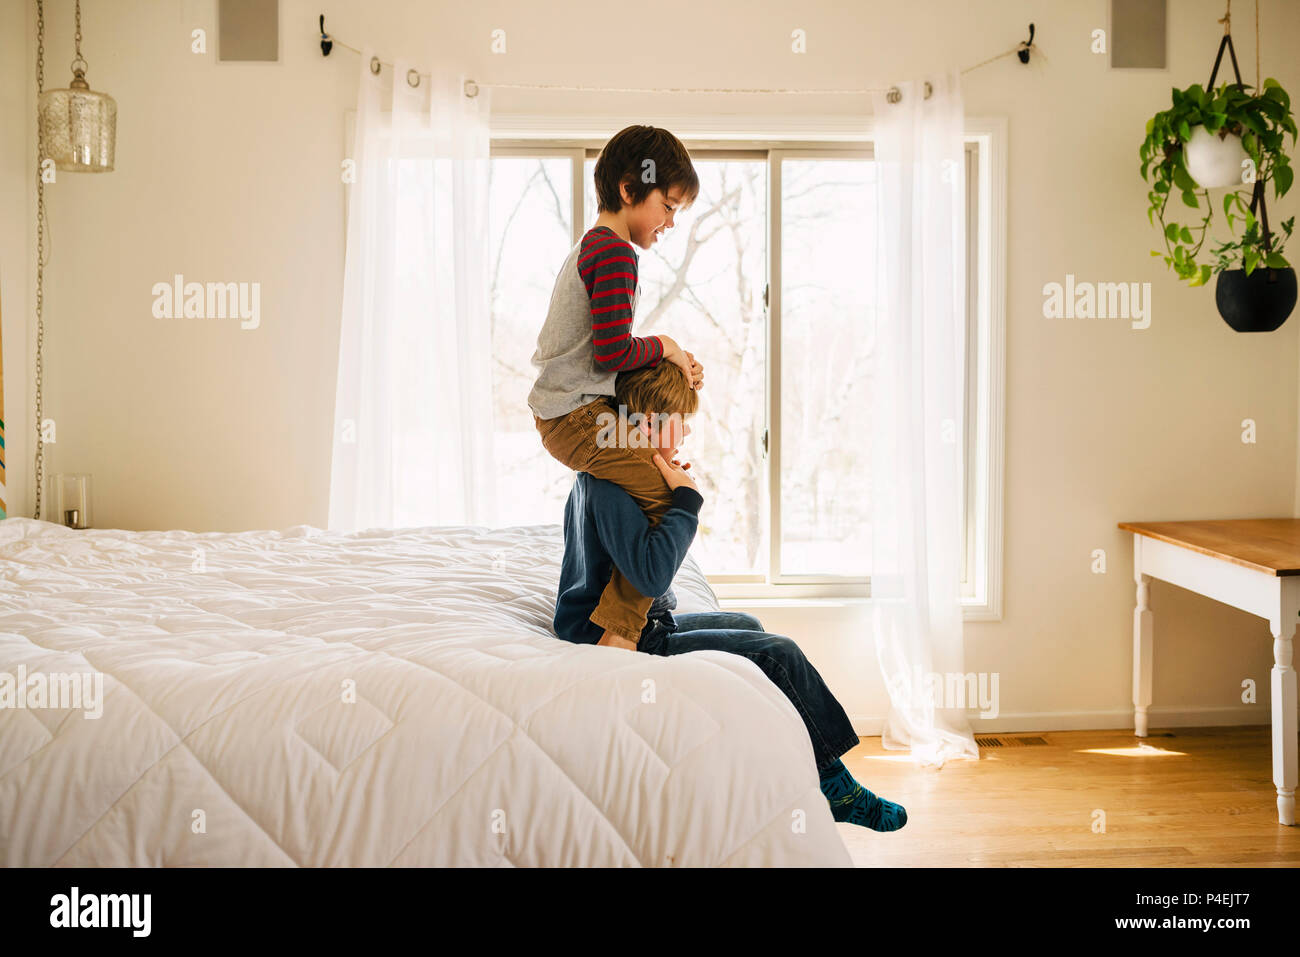 Boy sitting on a bed with his brother on his shoulders Stock Photo